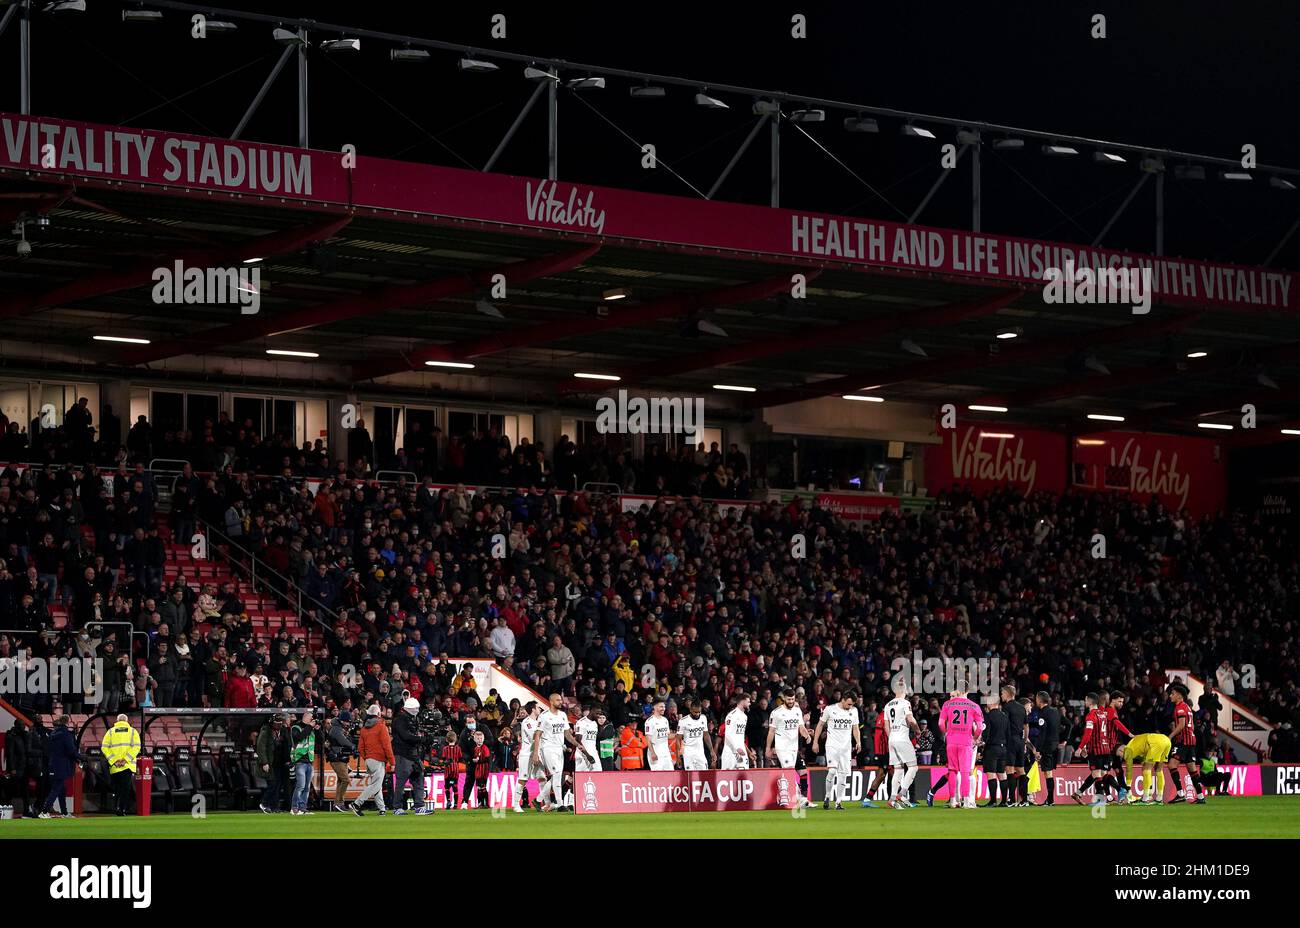 Boreham Wood and AFC Bournemouth players walk onto the pitch prior to kick-off in the Emirates FA Cup fourth round match at the Vitality Stadium, Bournemouth. Picture date: Sunday February 6, 2022. Stock Photo